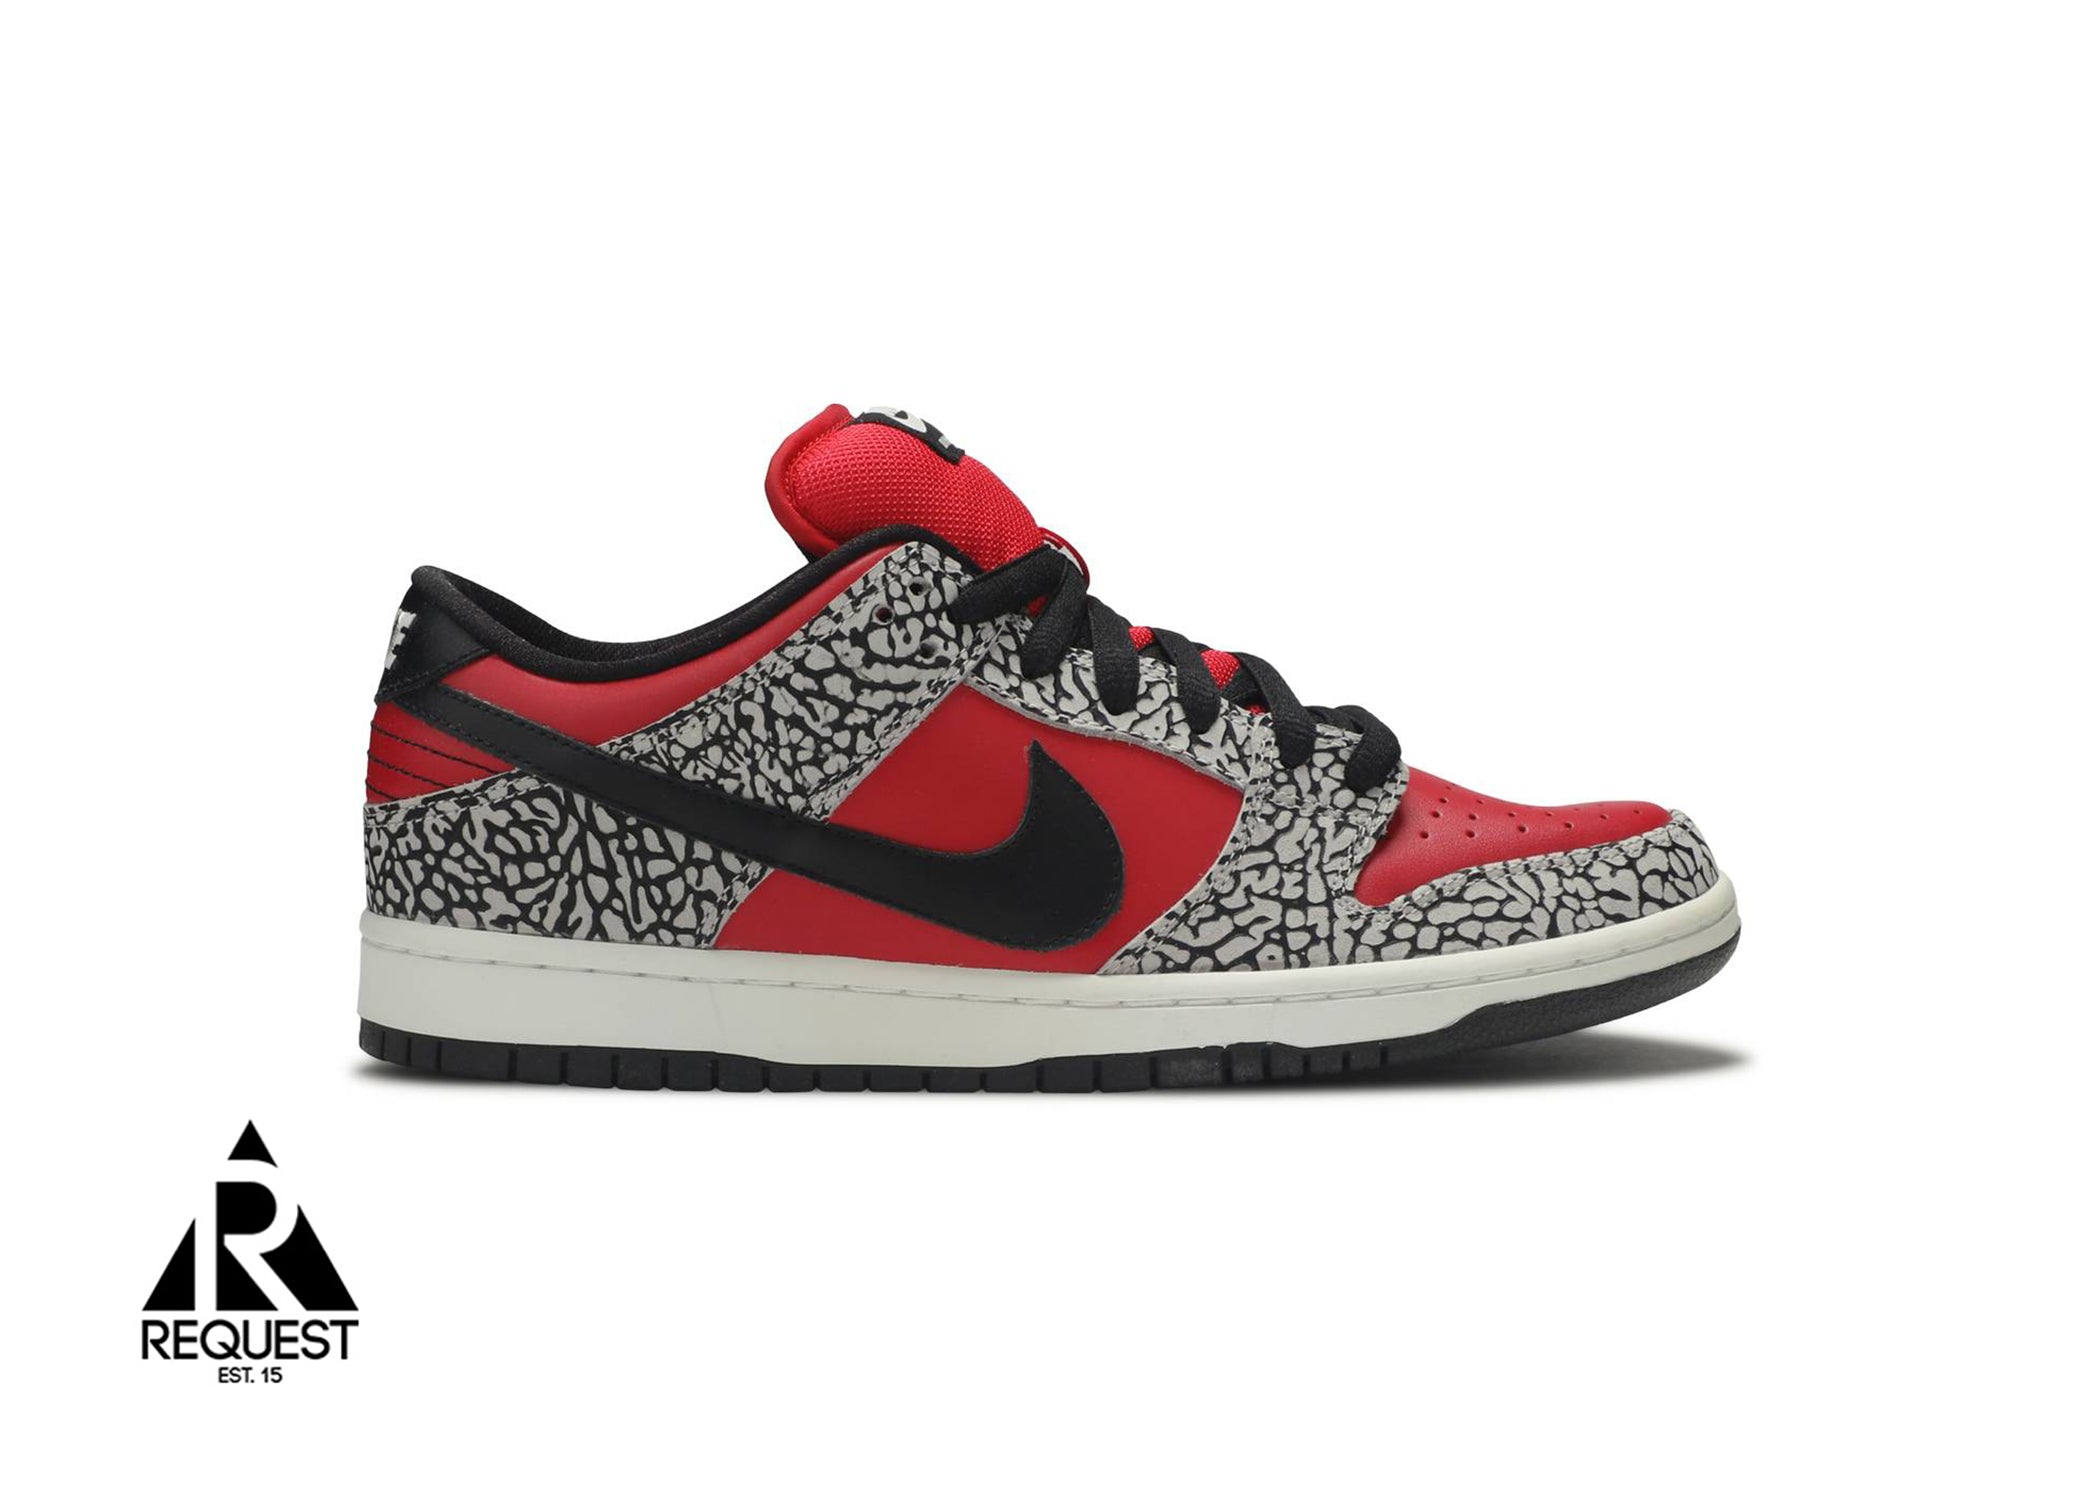 Nike Dunk SB Low “Supreme Red Cement”